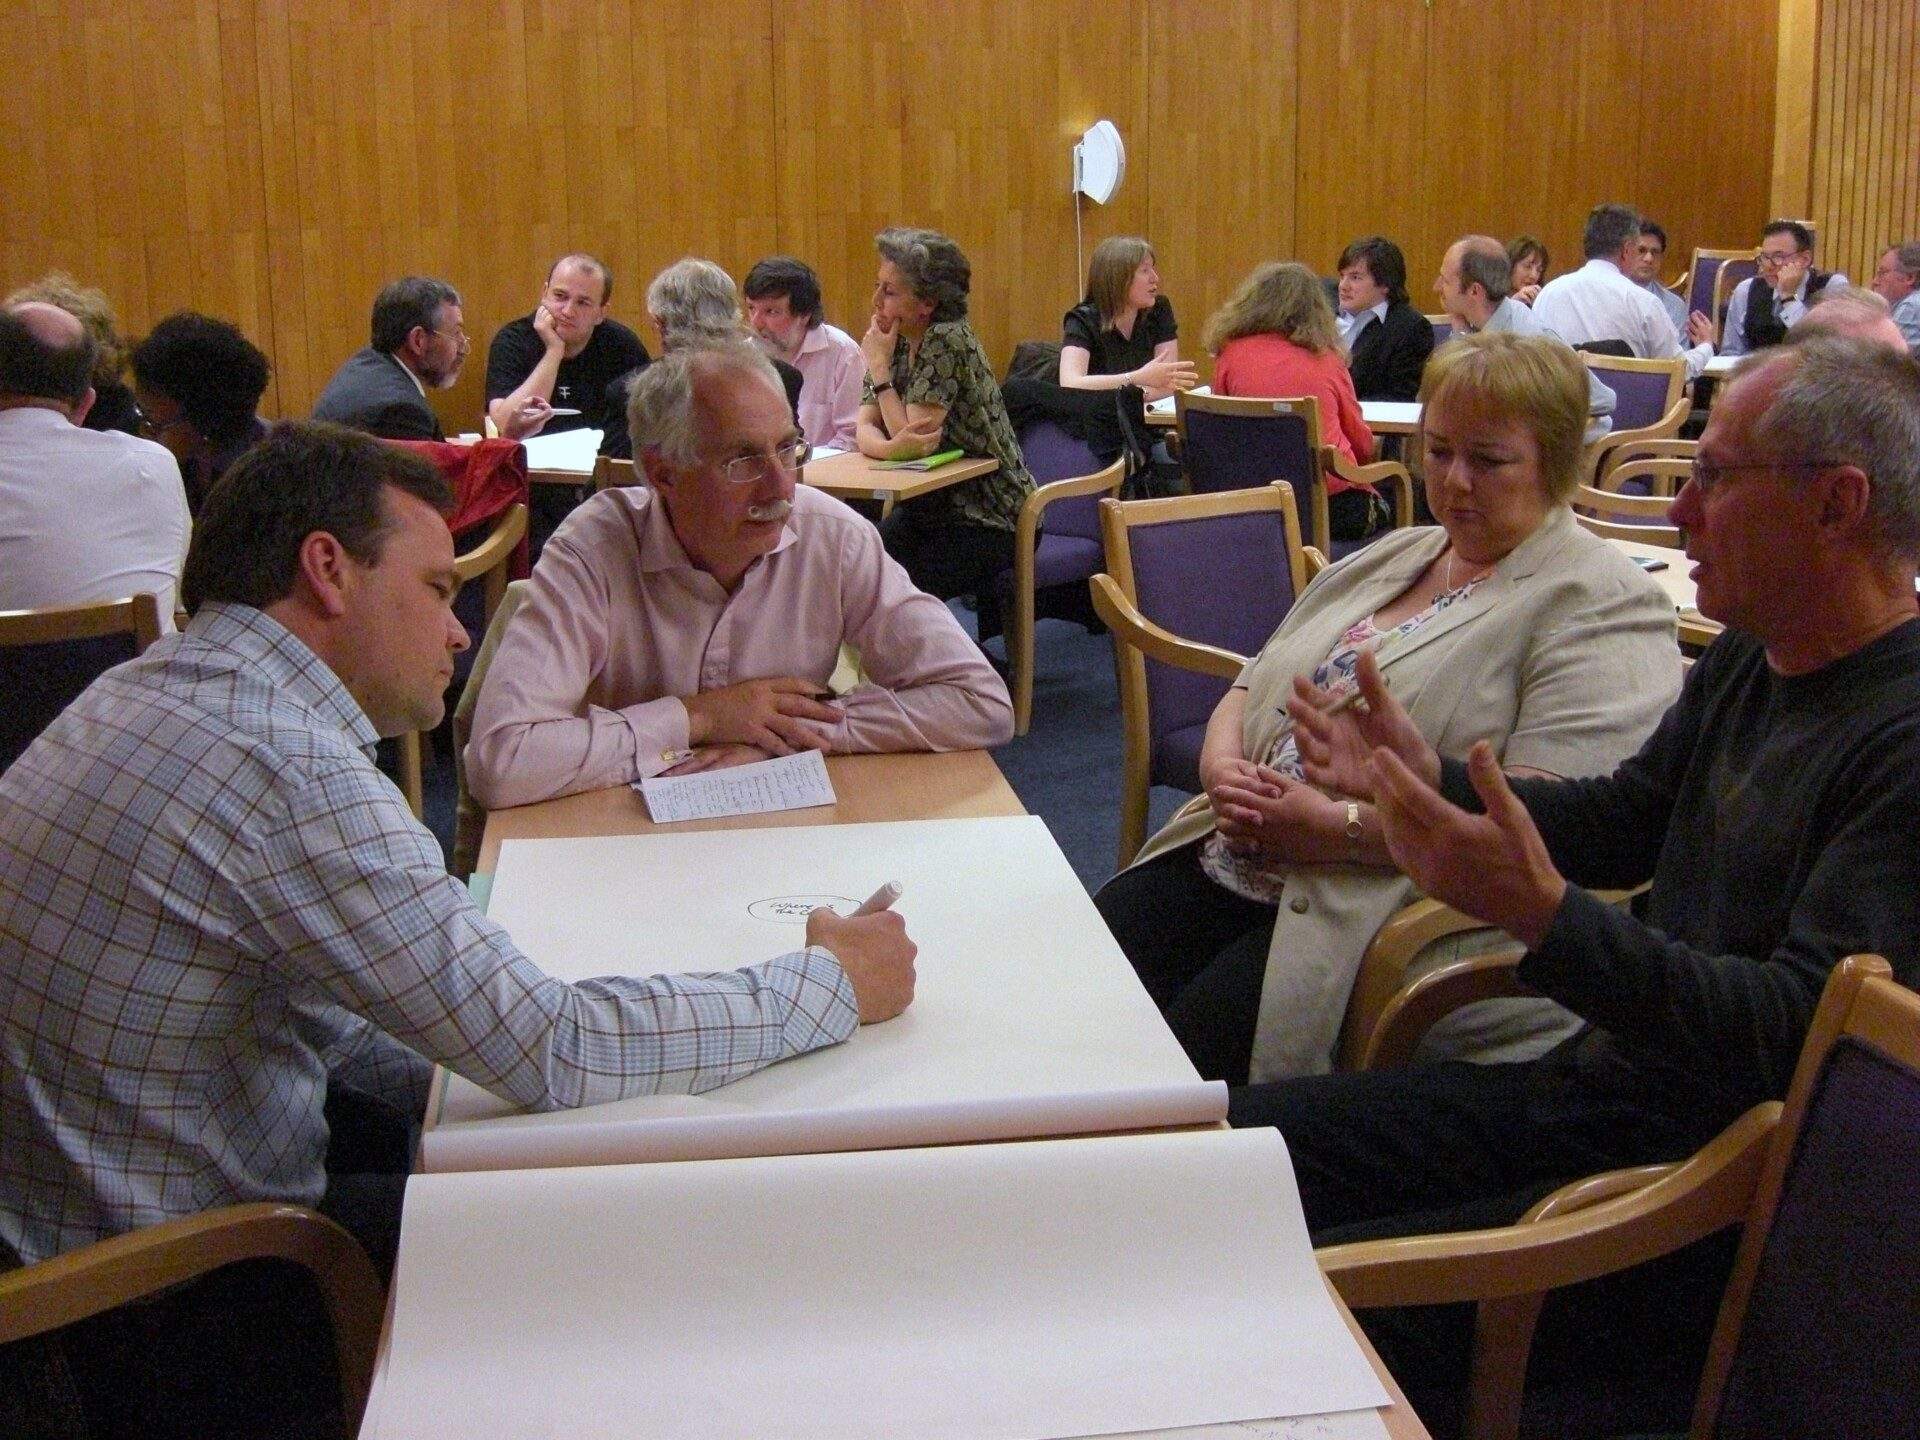 Gurteen Knowledge Cafe - Knowledge sharing at its best